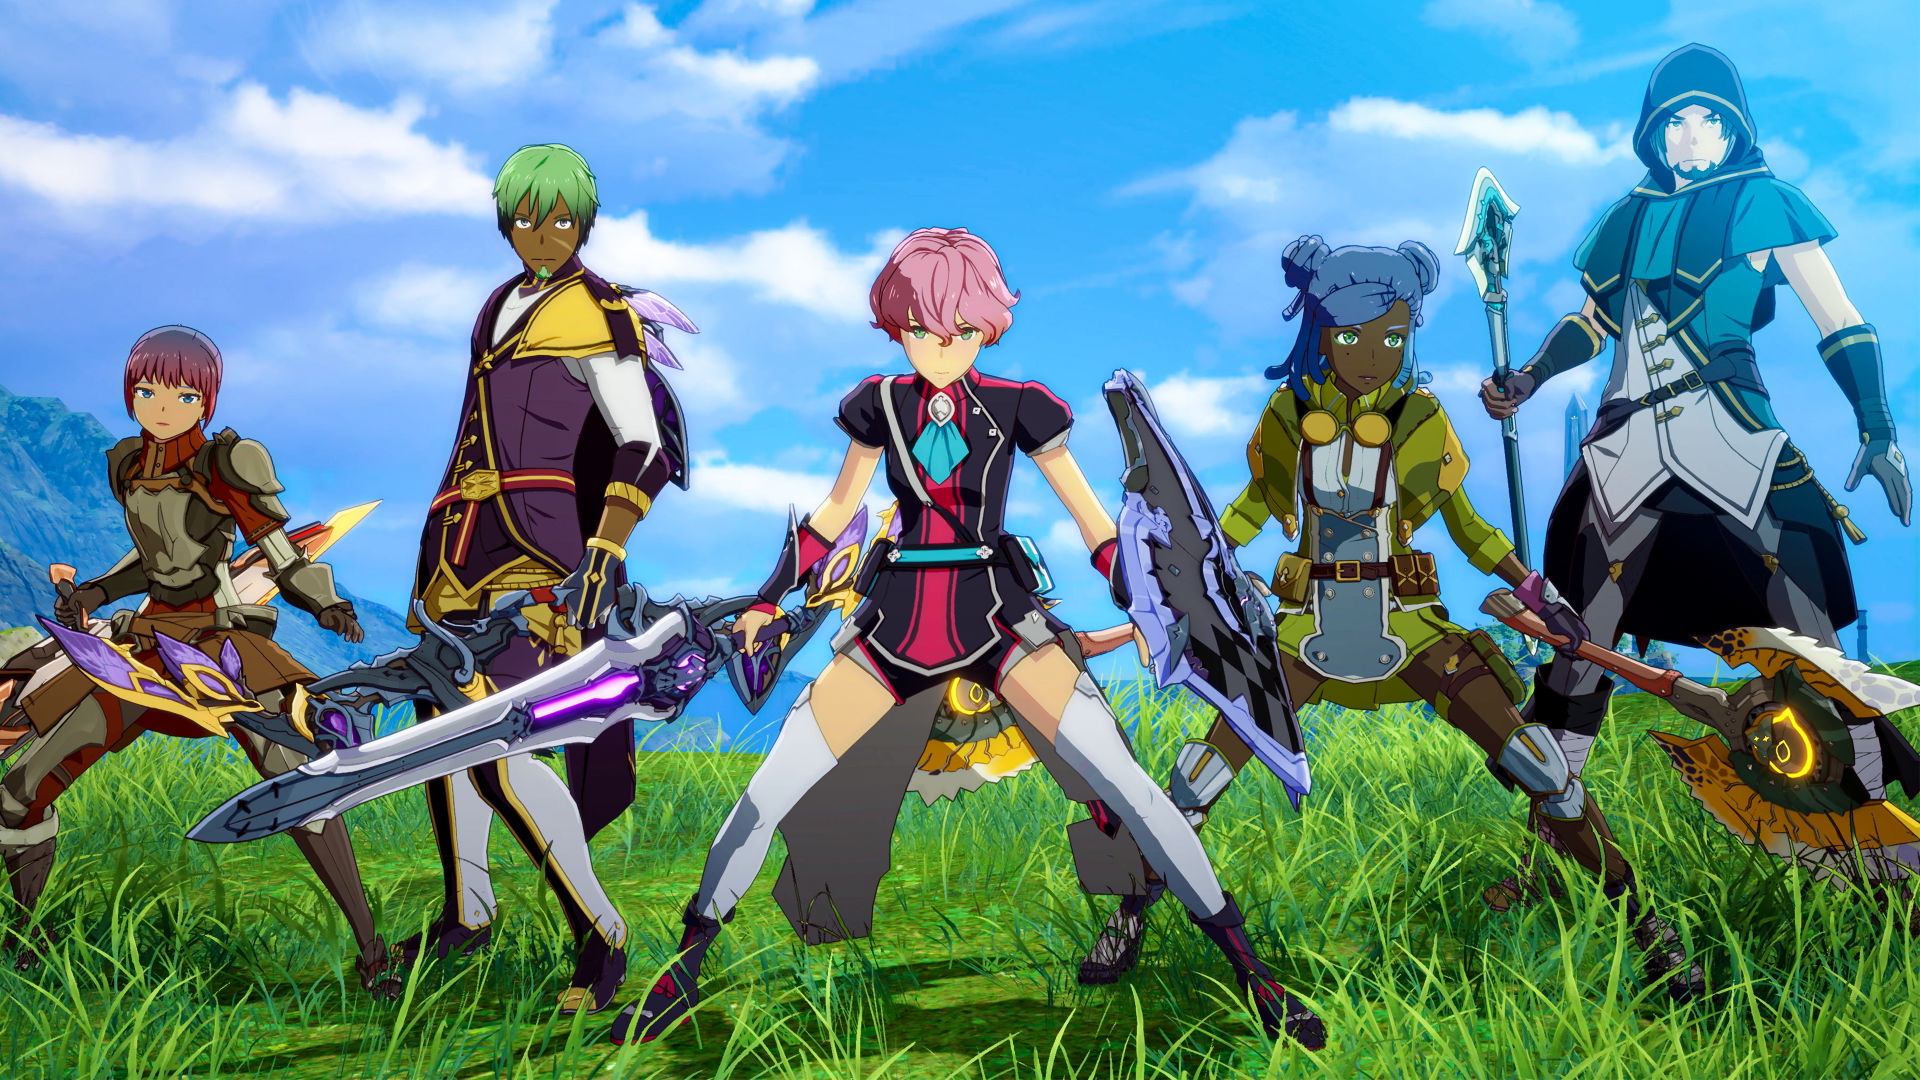 Blue Protocol screenshot of five diverse characters in a grassy field wielding swords, shields, staves, and more